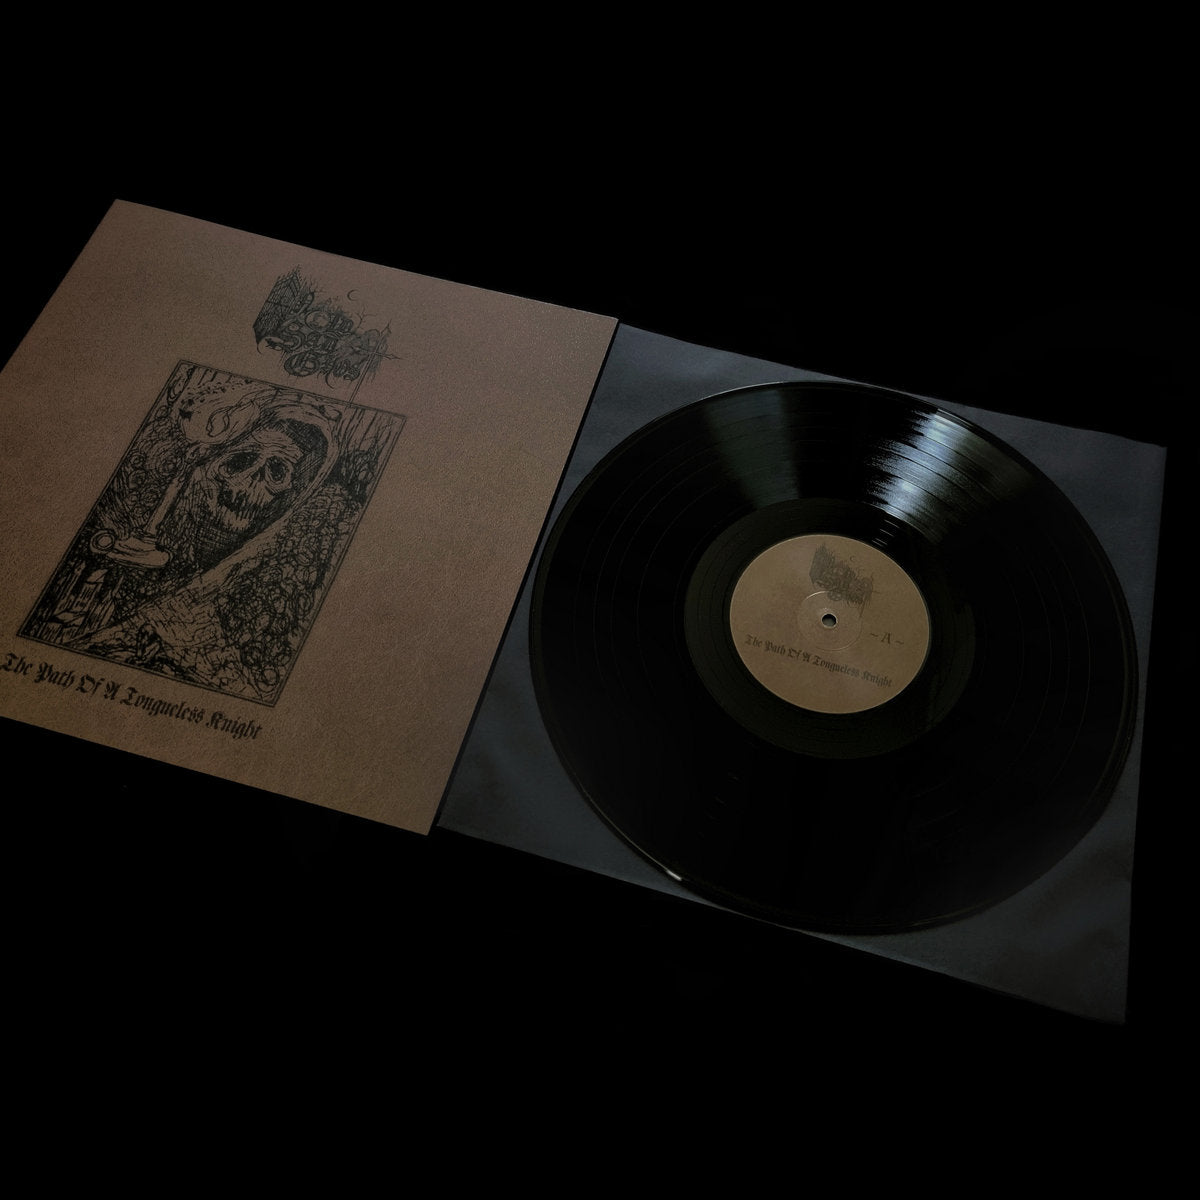 [SOLD OUT] AN OLD SAD GHOST "The Path Of A Tongueless Knight" vinyl LP (180g, numbered, lim. 200)